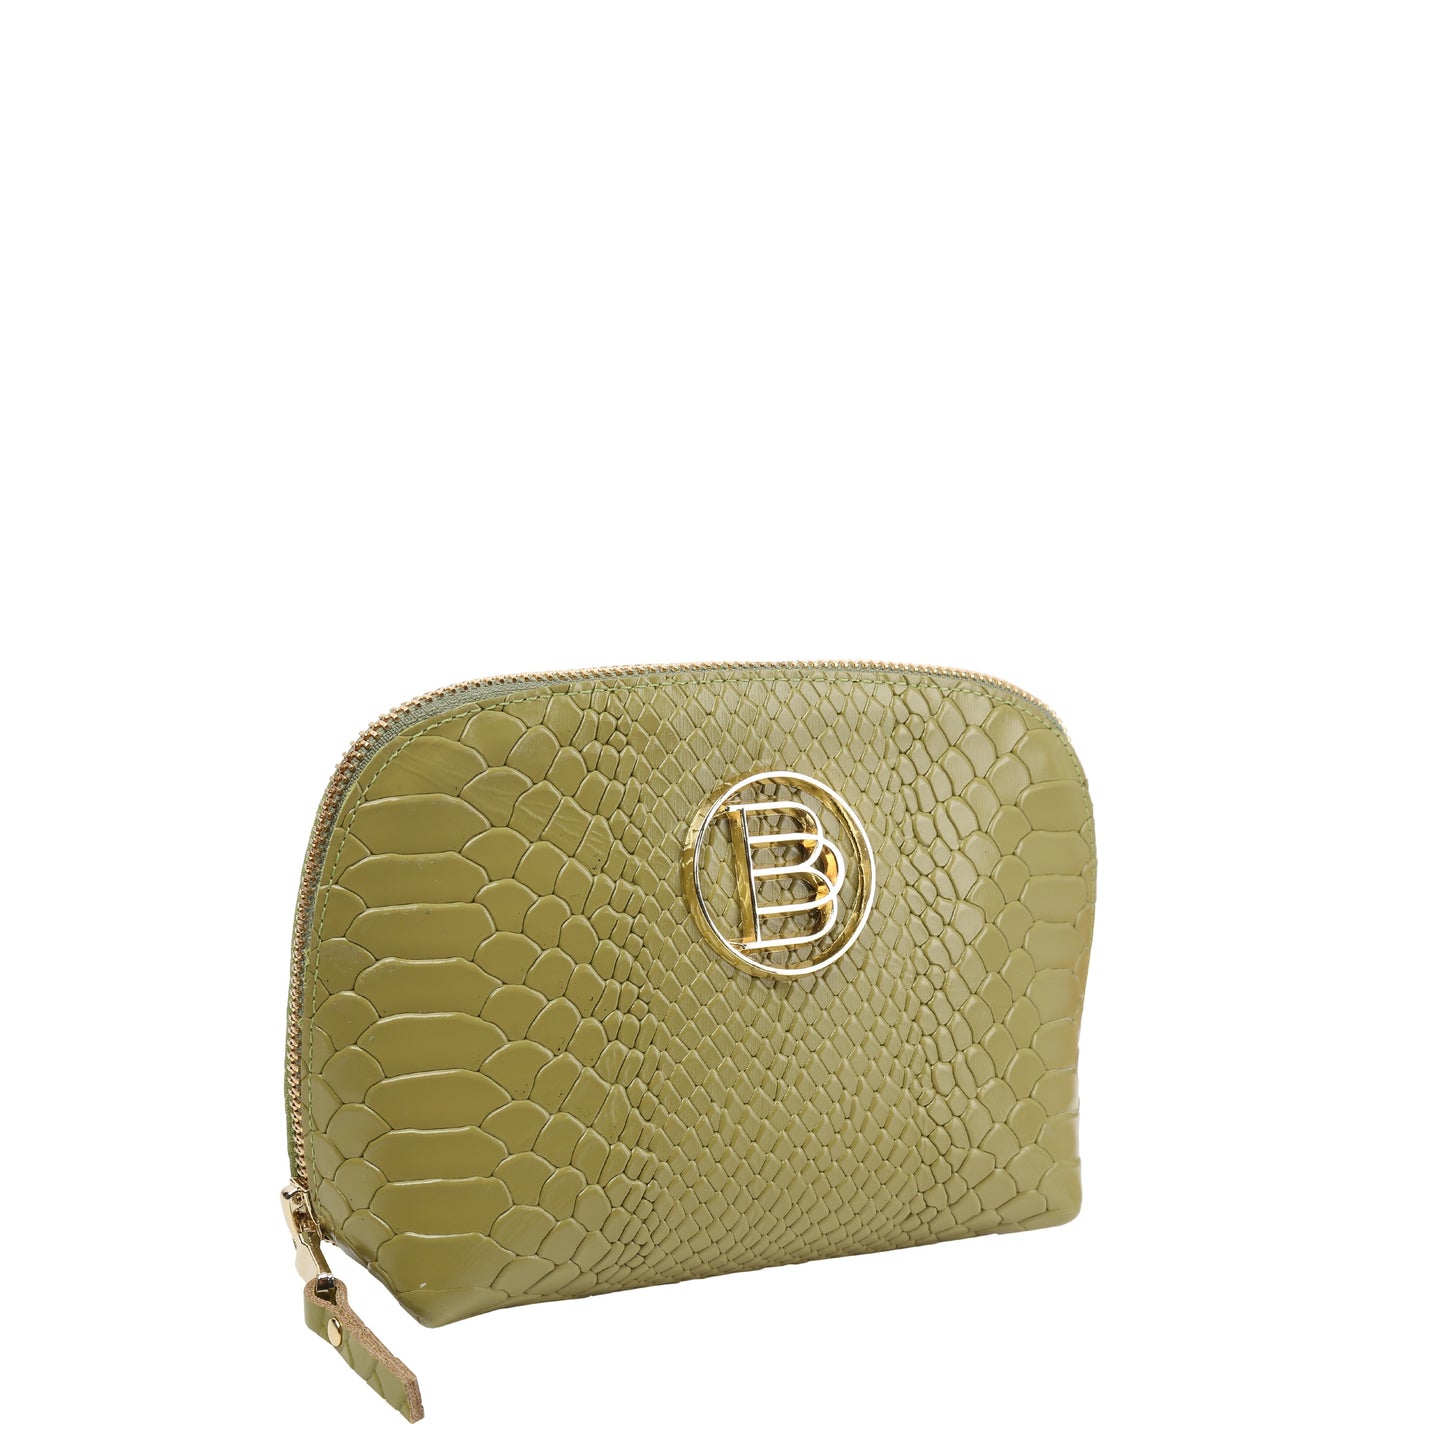 OLIVE leather women's cosmetic bag